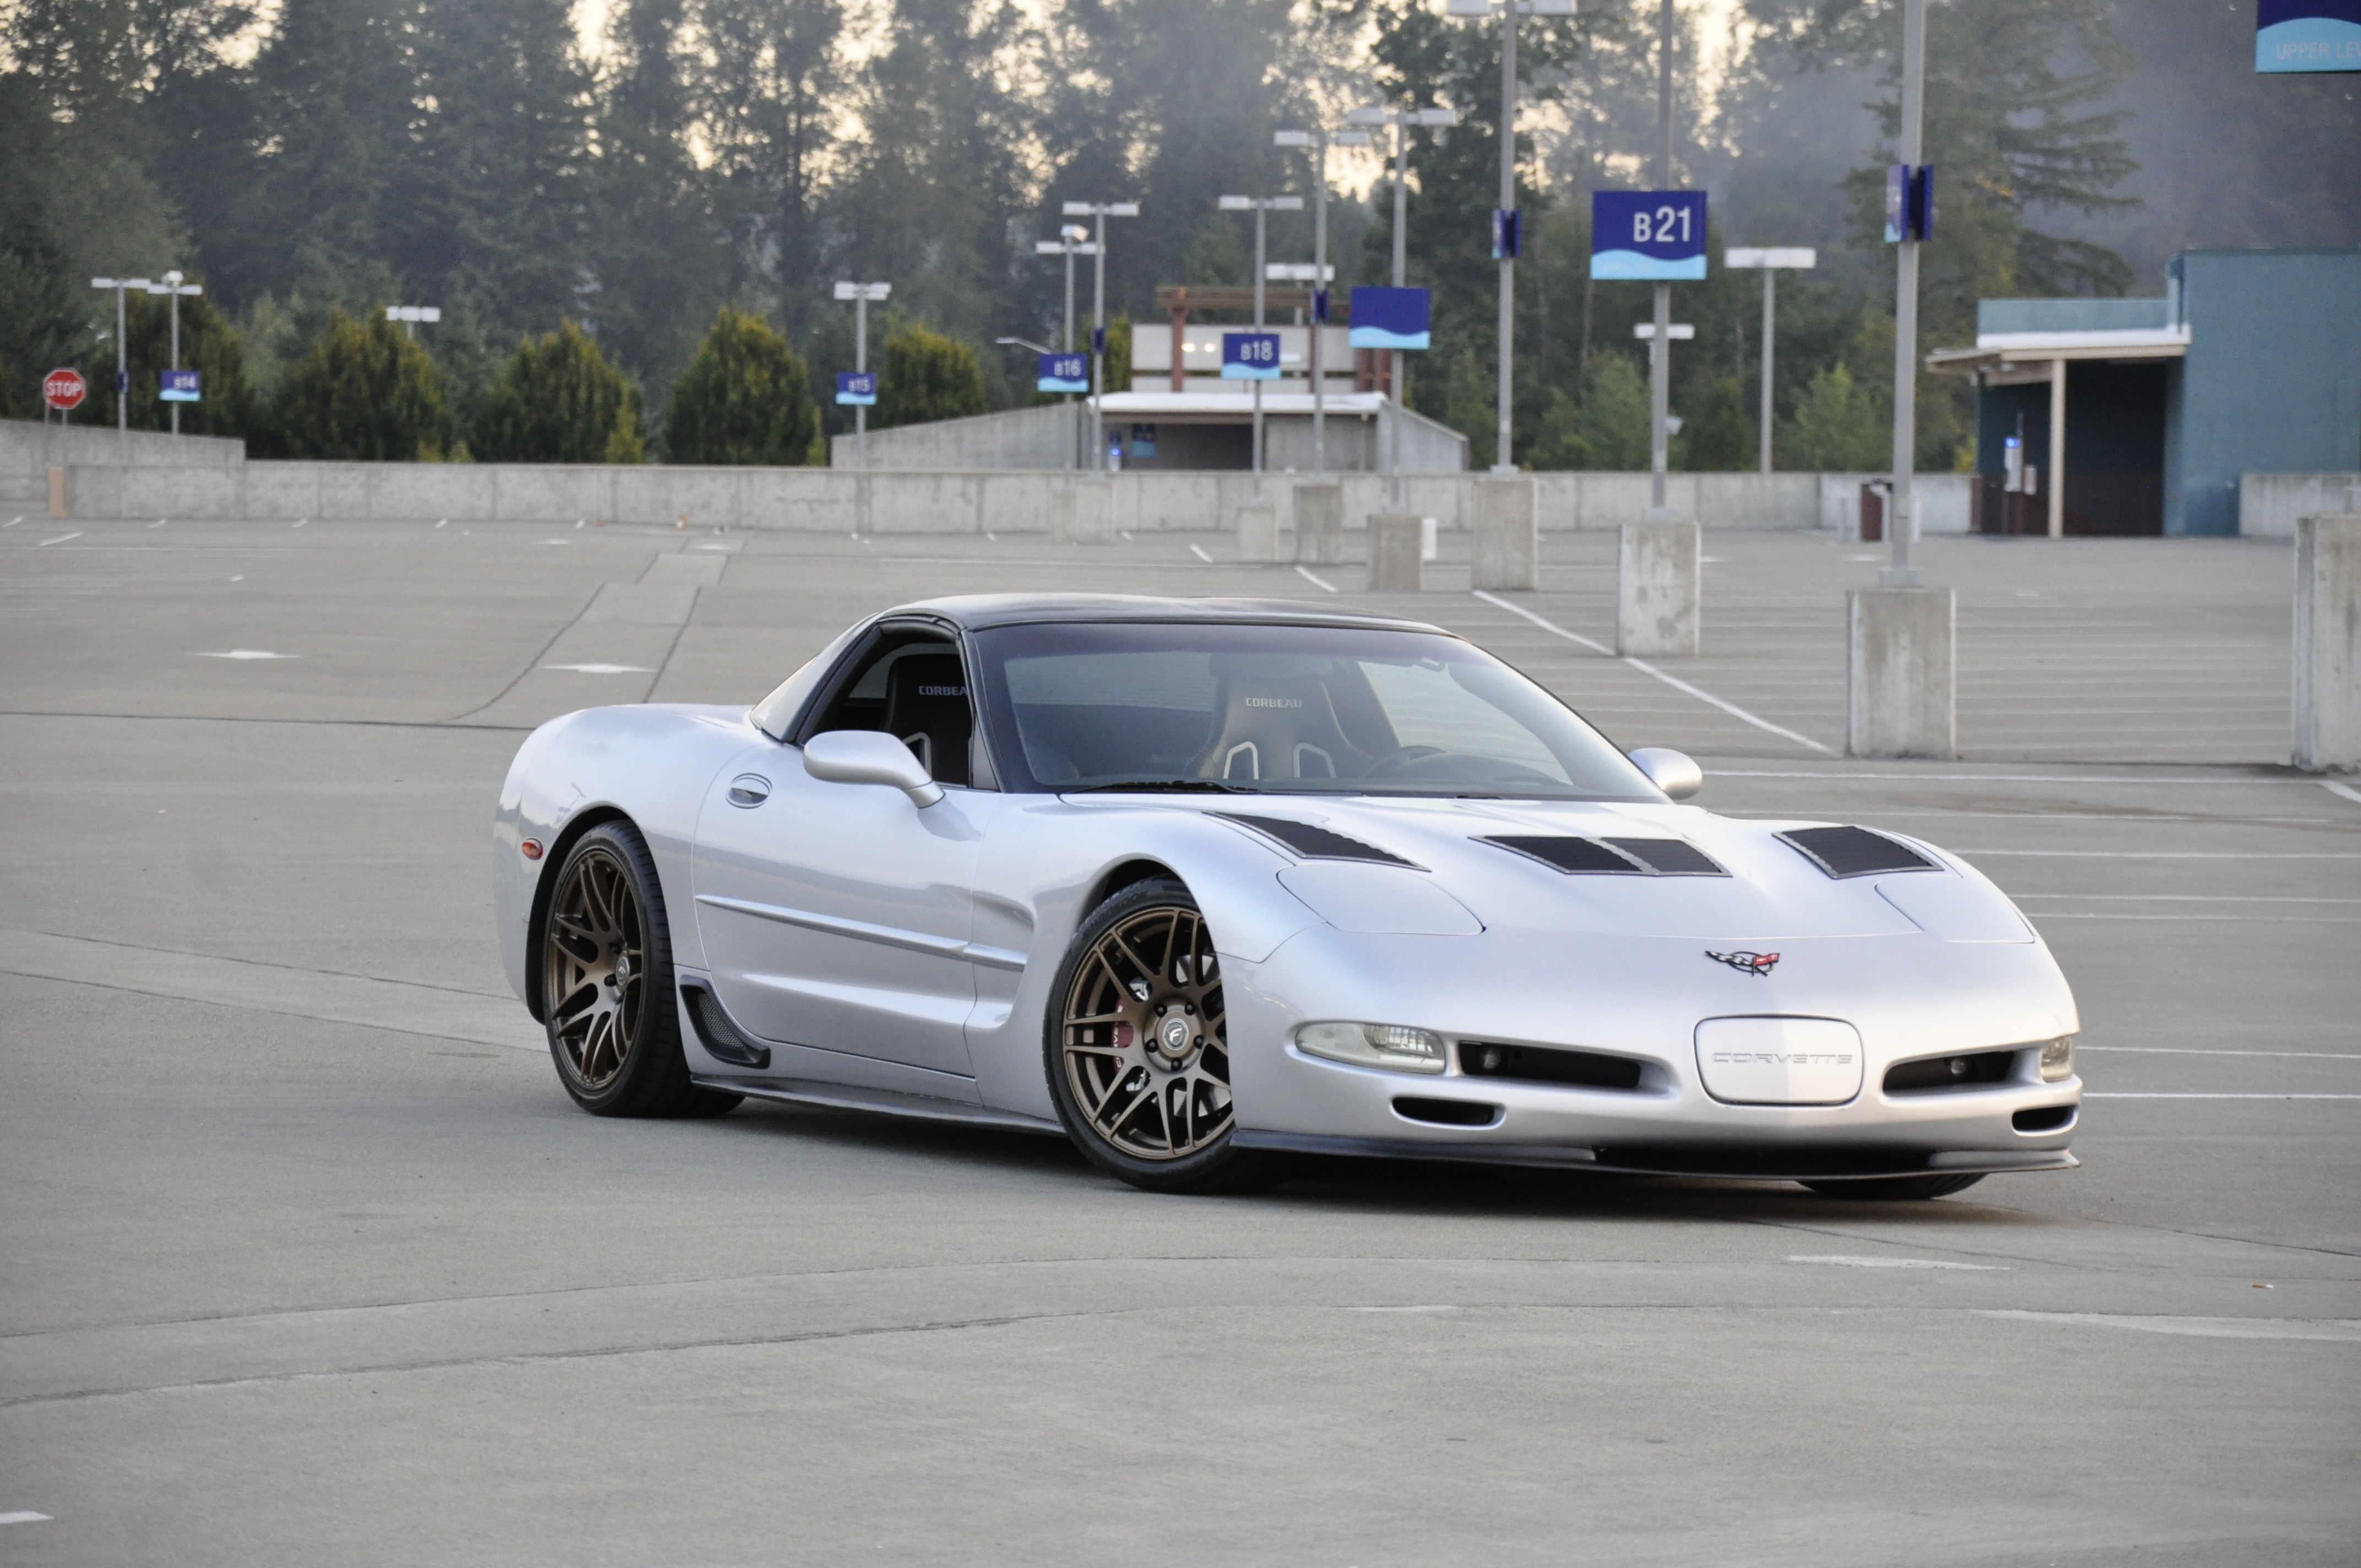 What Are Your Favorite C5 Corvette Wheel Options? 